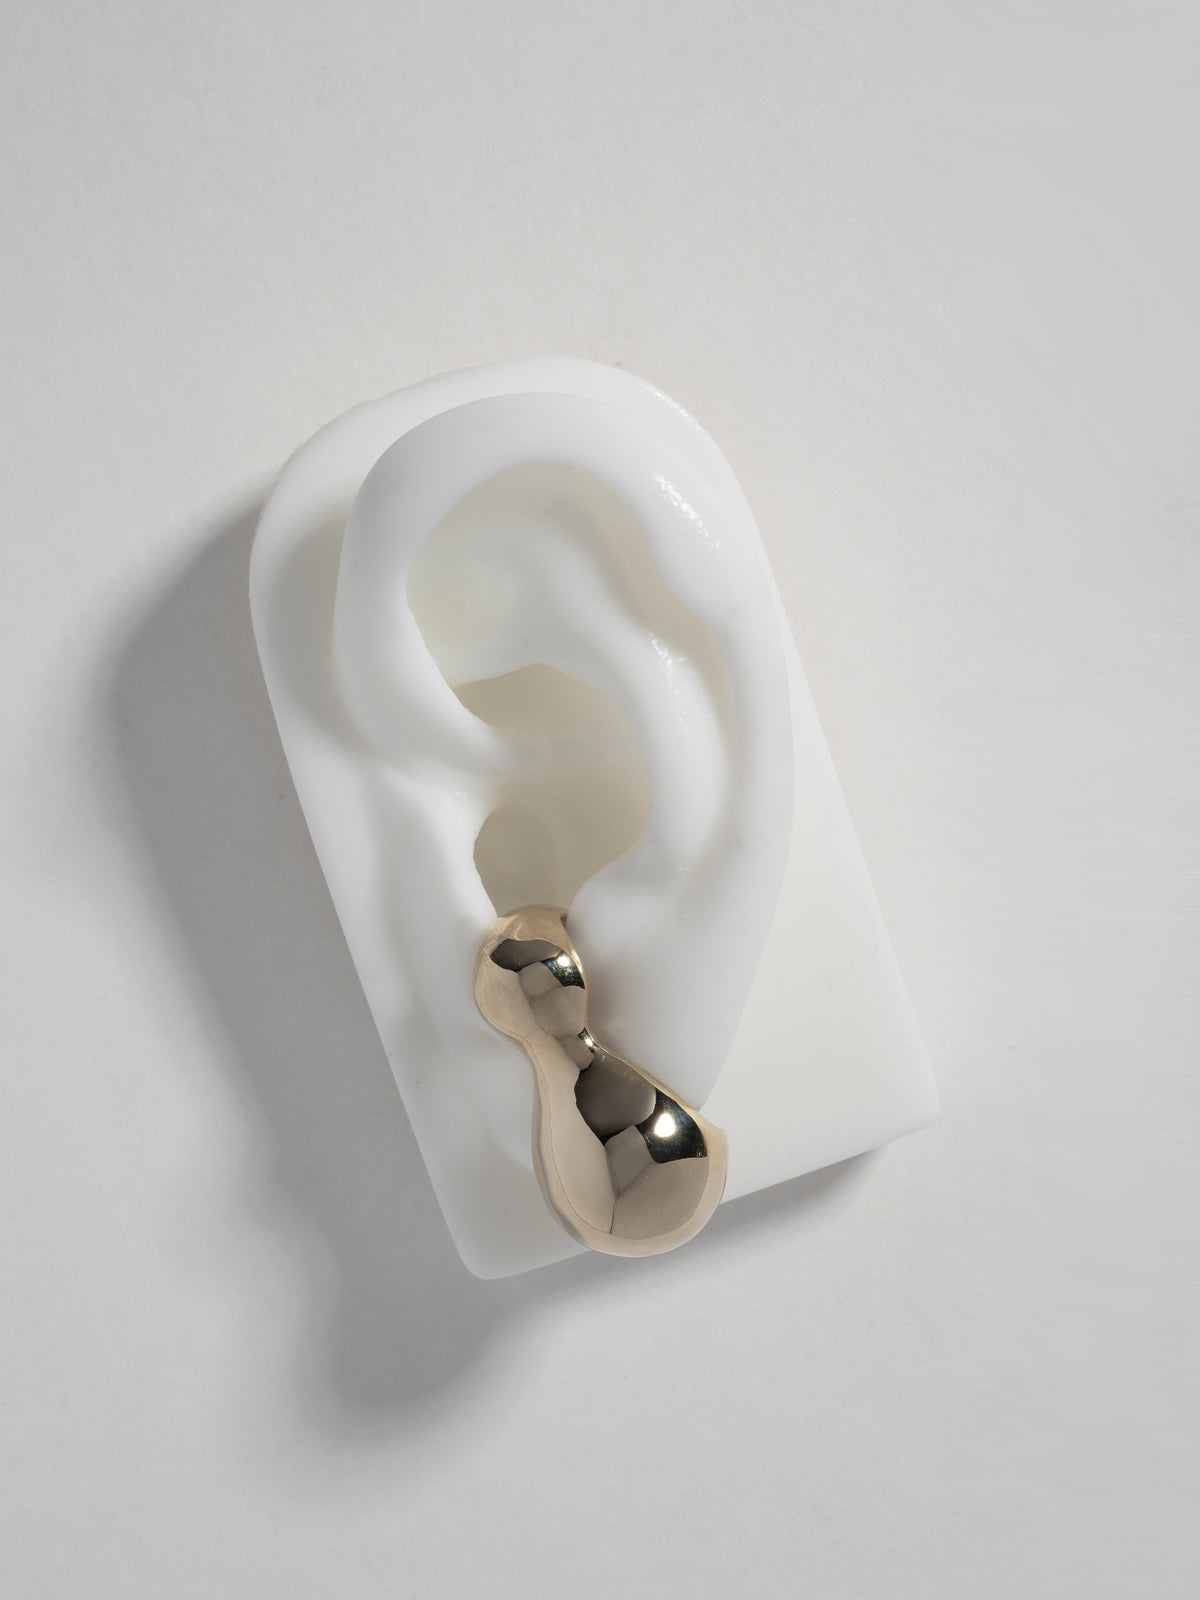 Close up product image of FARIS BOLO Stud in gold-plated bronze, shown on white silicone ear display.